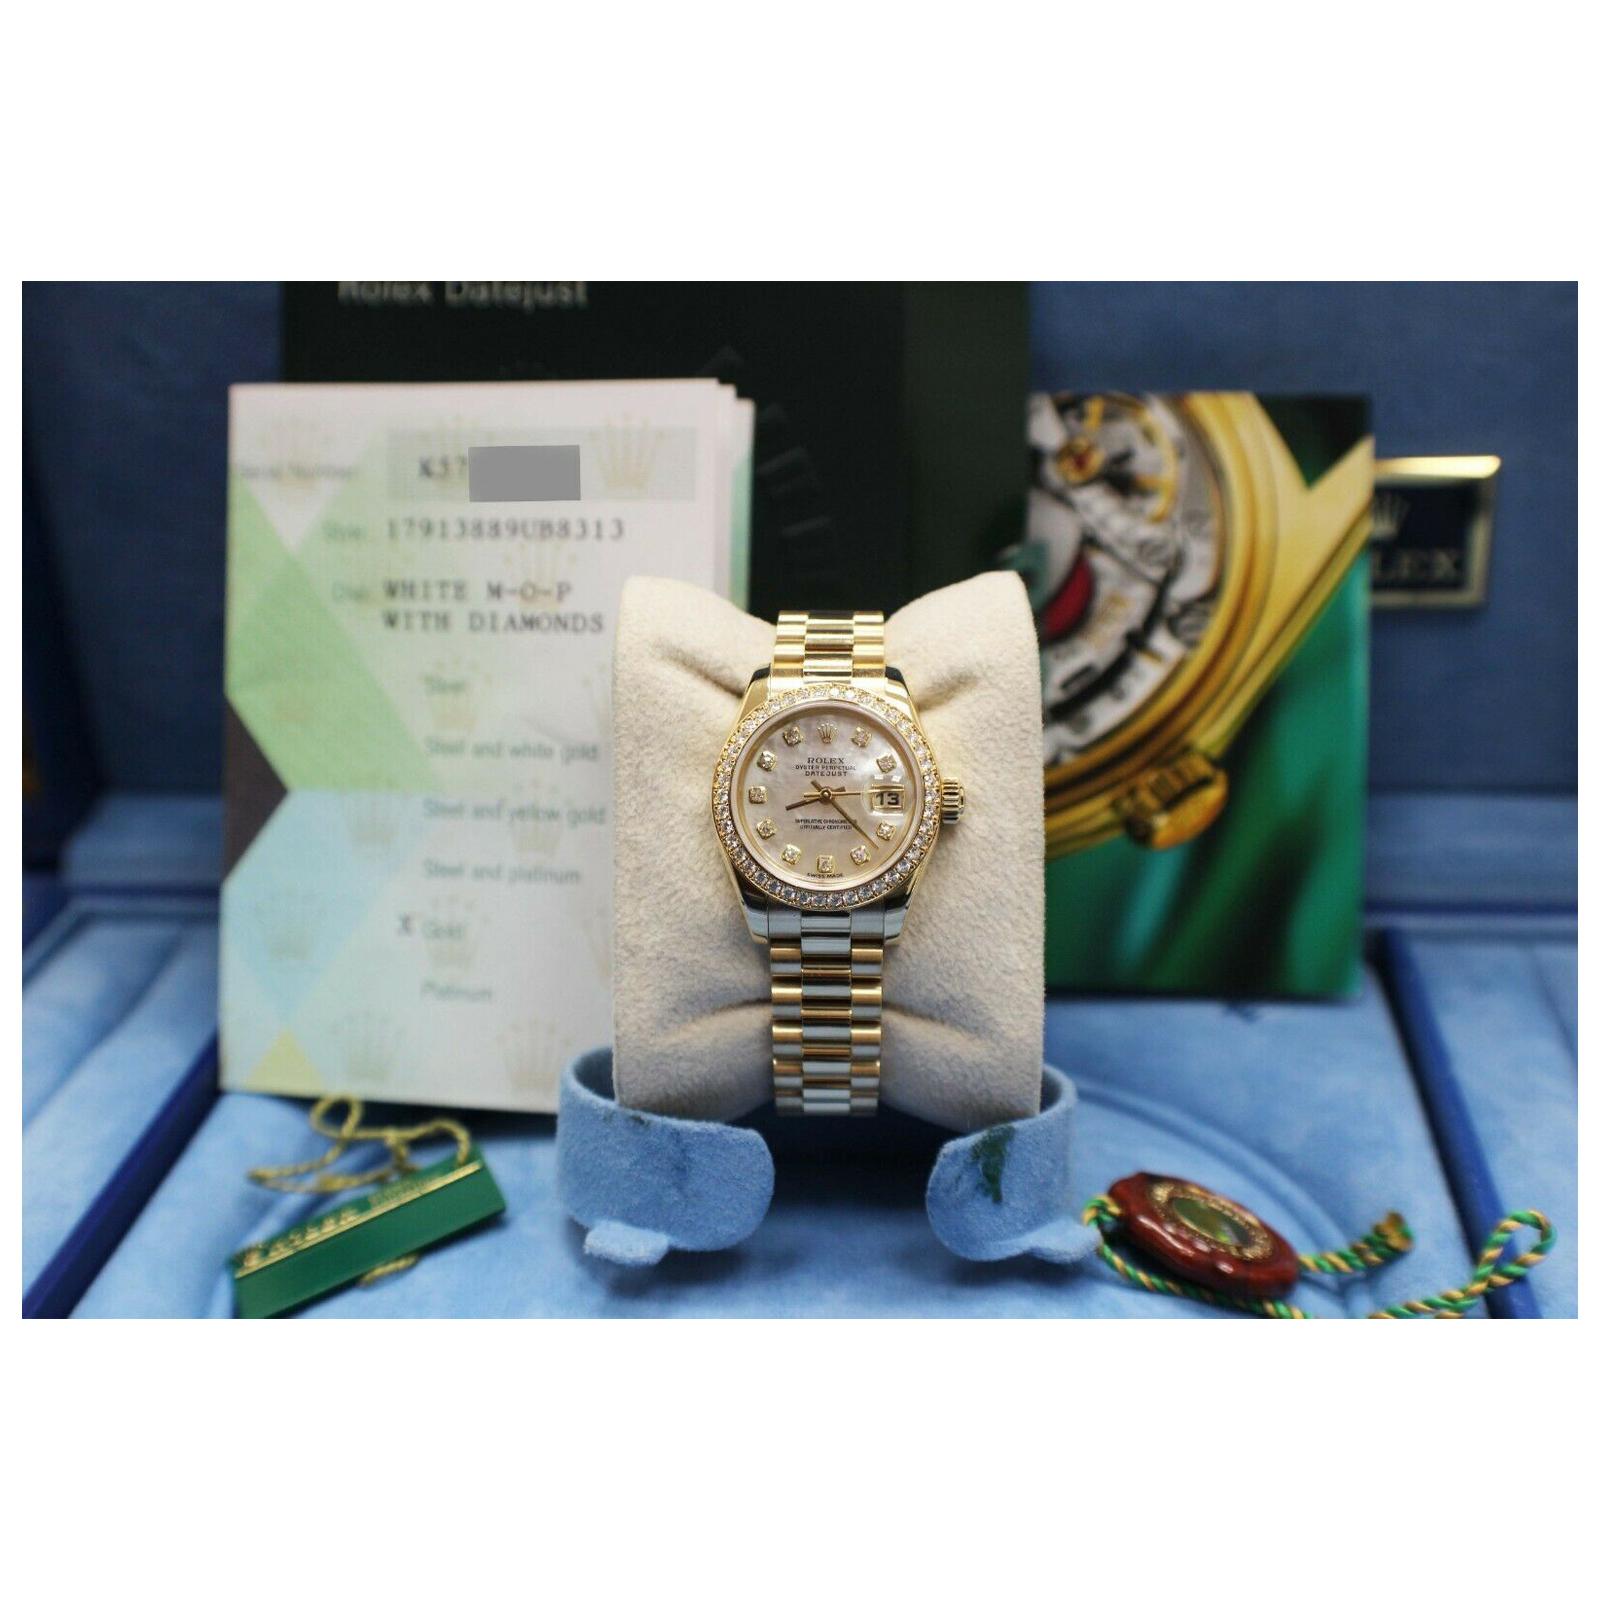 Style Number: 179138
Serial: K571***
Year: 2004
Model: Ladies President Datejust
Case Material: 18K Yellow Gold
Band: 18K Yellow Gold
Bezel: Original Factory Diamond Bezel 
Dial: Original Factory Mother of Pearl Diamond Dial 
Face: Sapphire